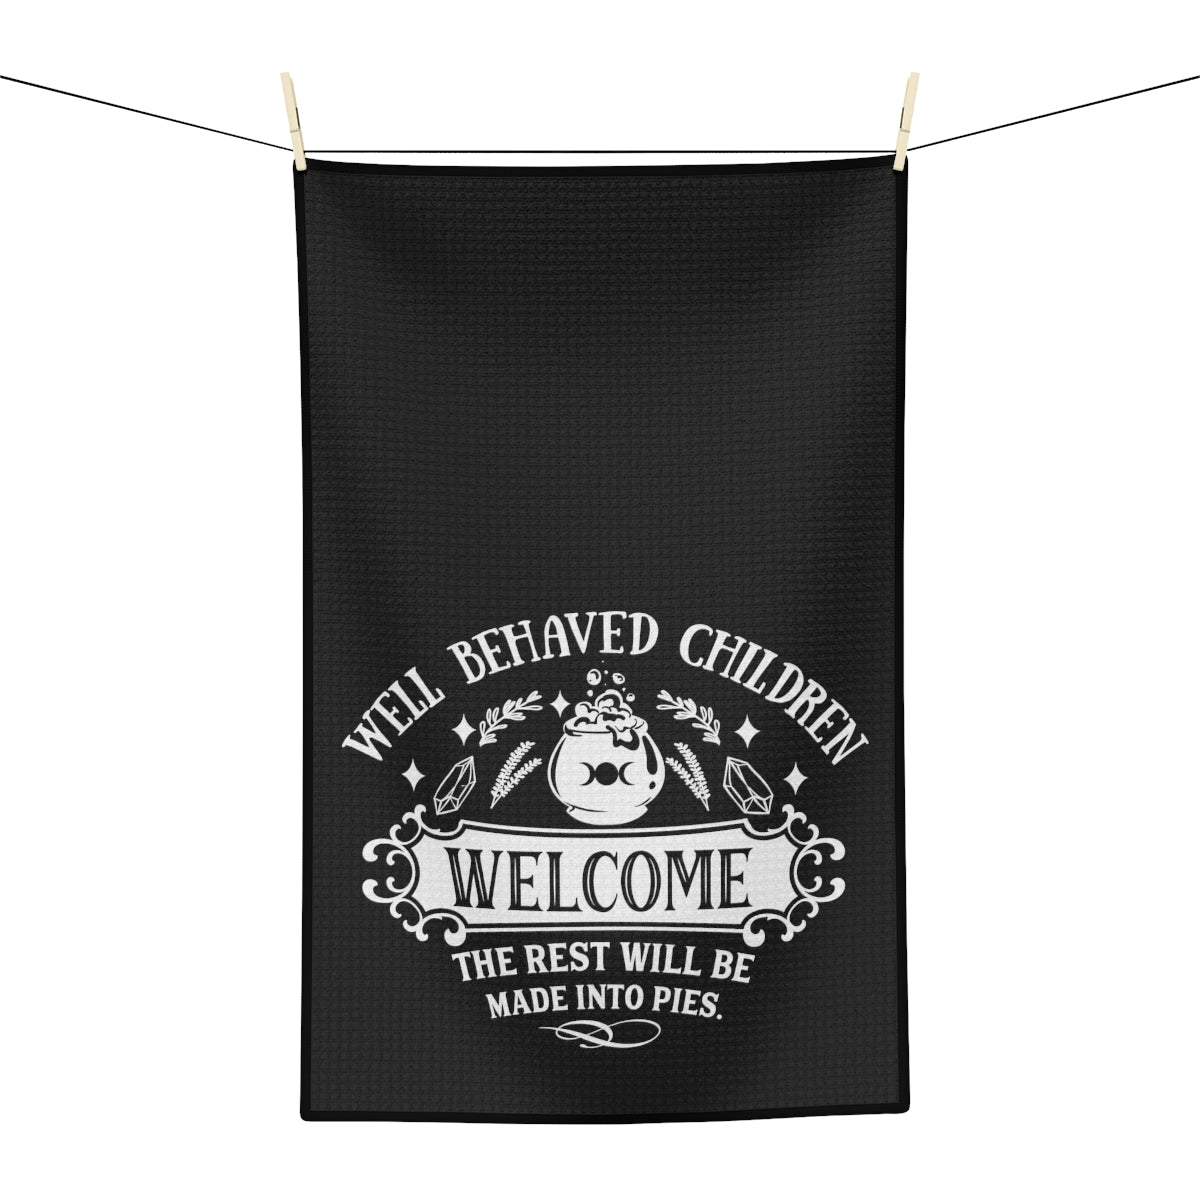 Well Behaves Children Black Tea Towel - Witchy Kitchens